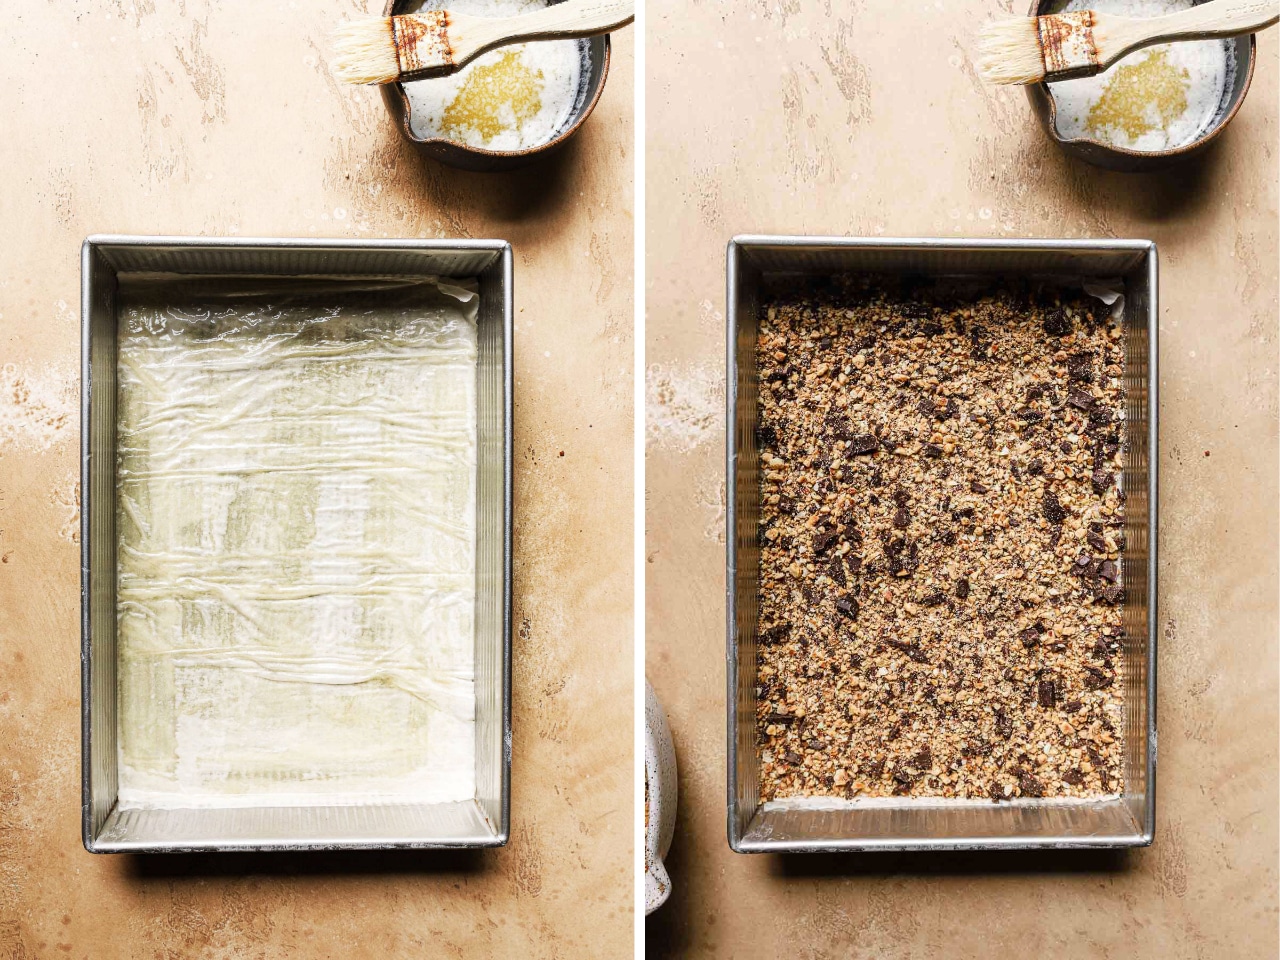 Two image: on the left, a filo sheet is spread over the bottom of the baking pan. On the right, the chocolate baklava filling is layered on top of the filo.